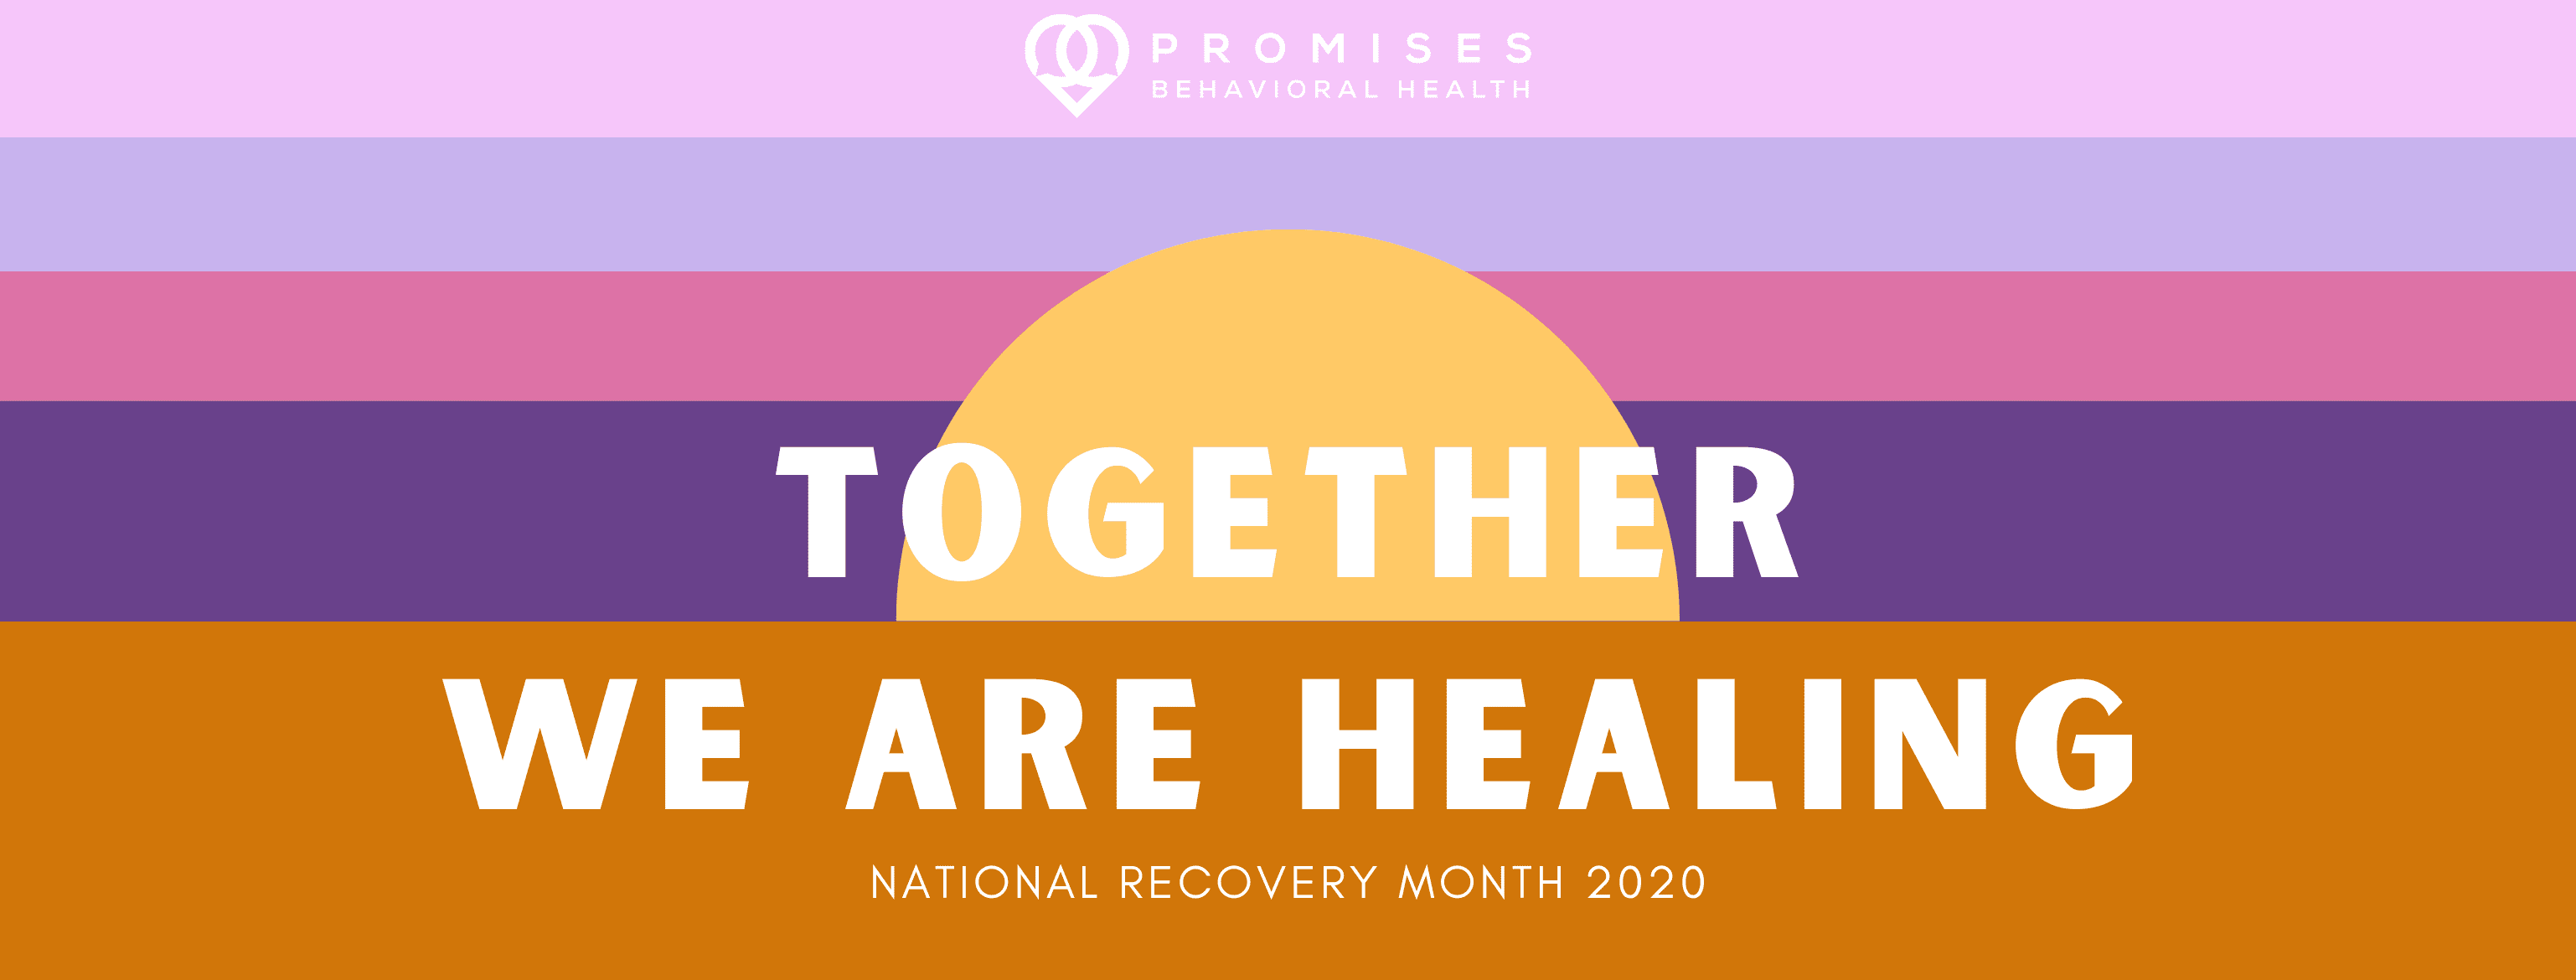 Together We Are Healing National Recovery Month 2020